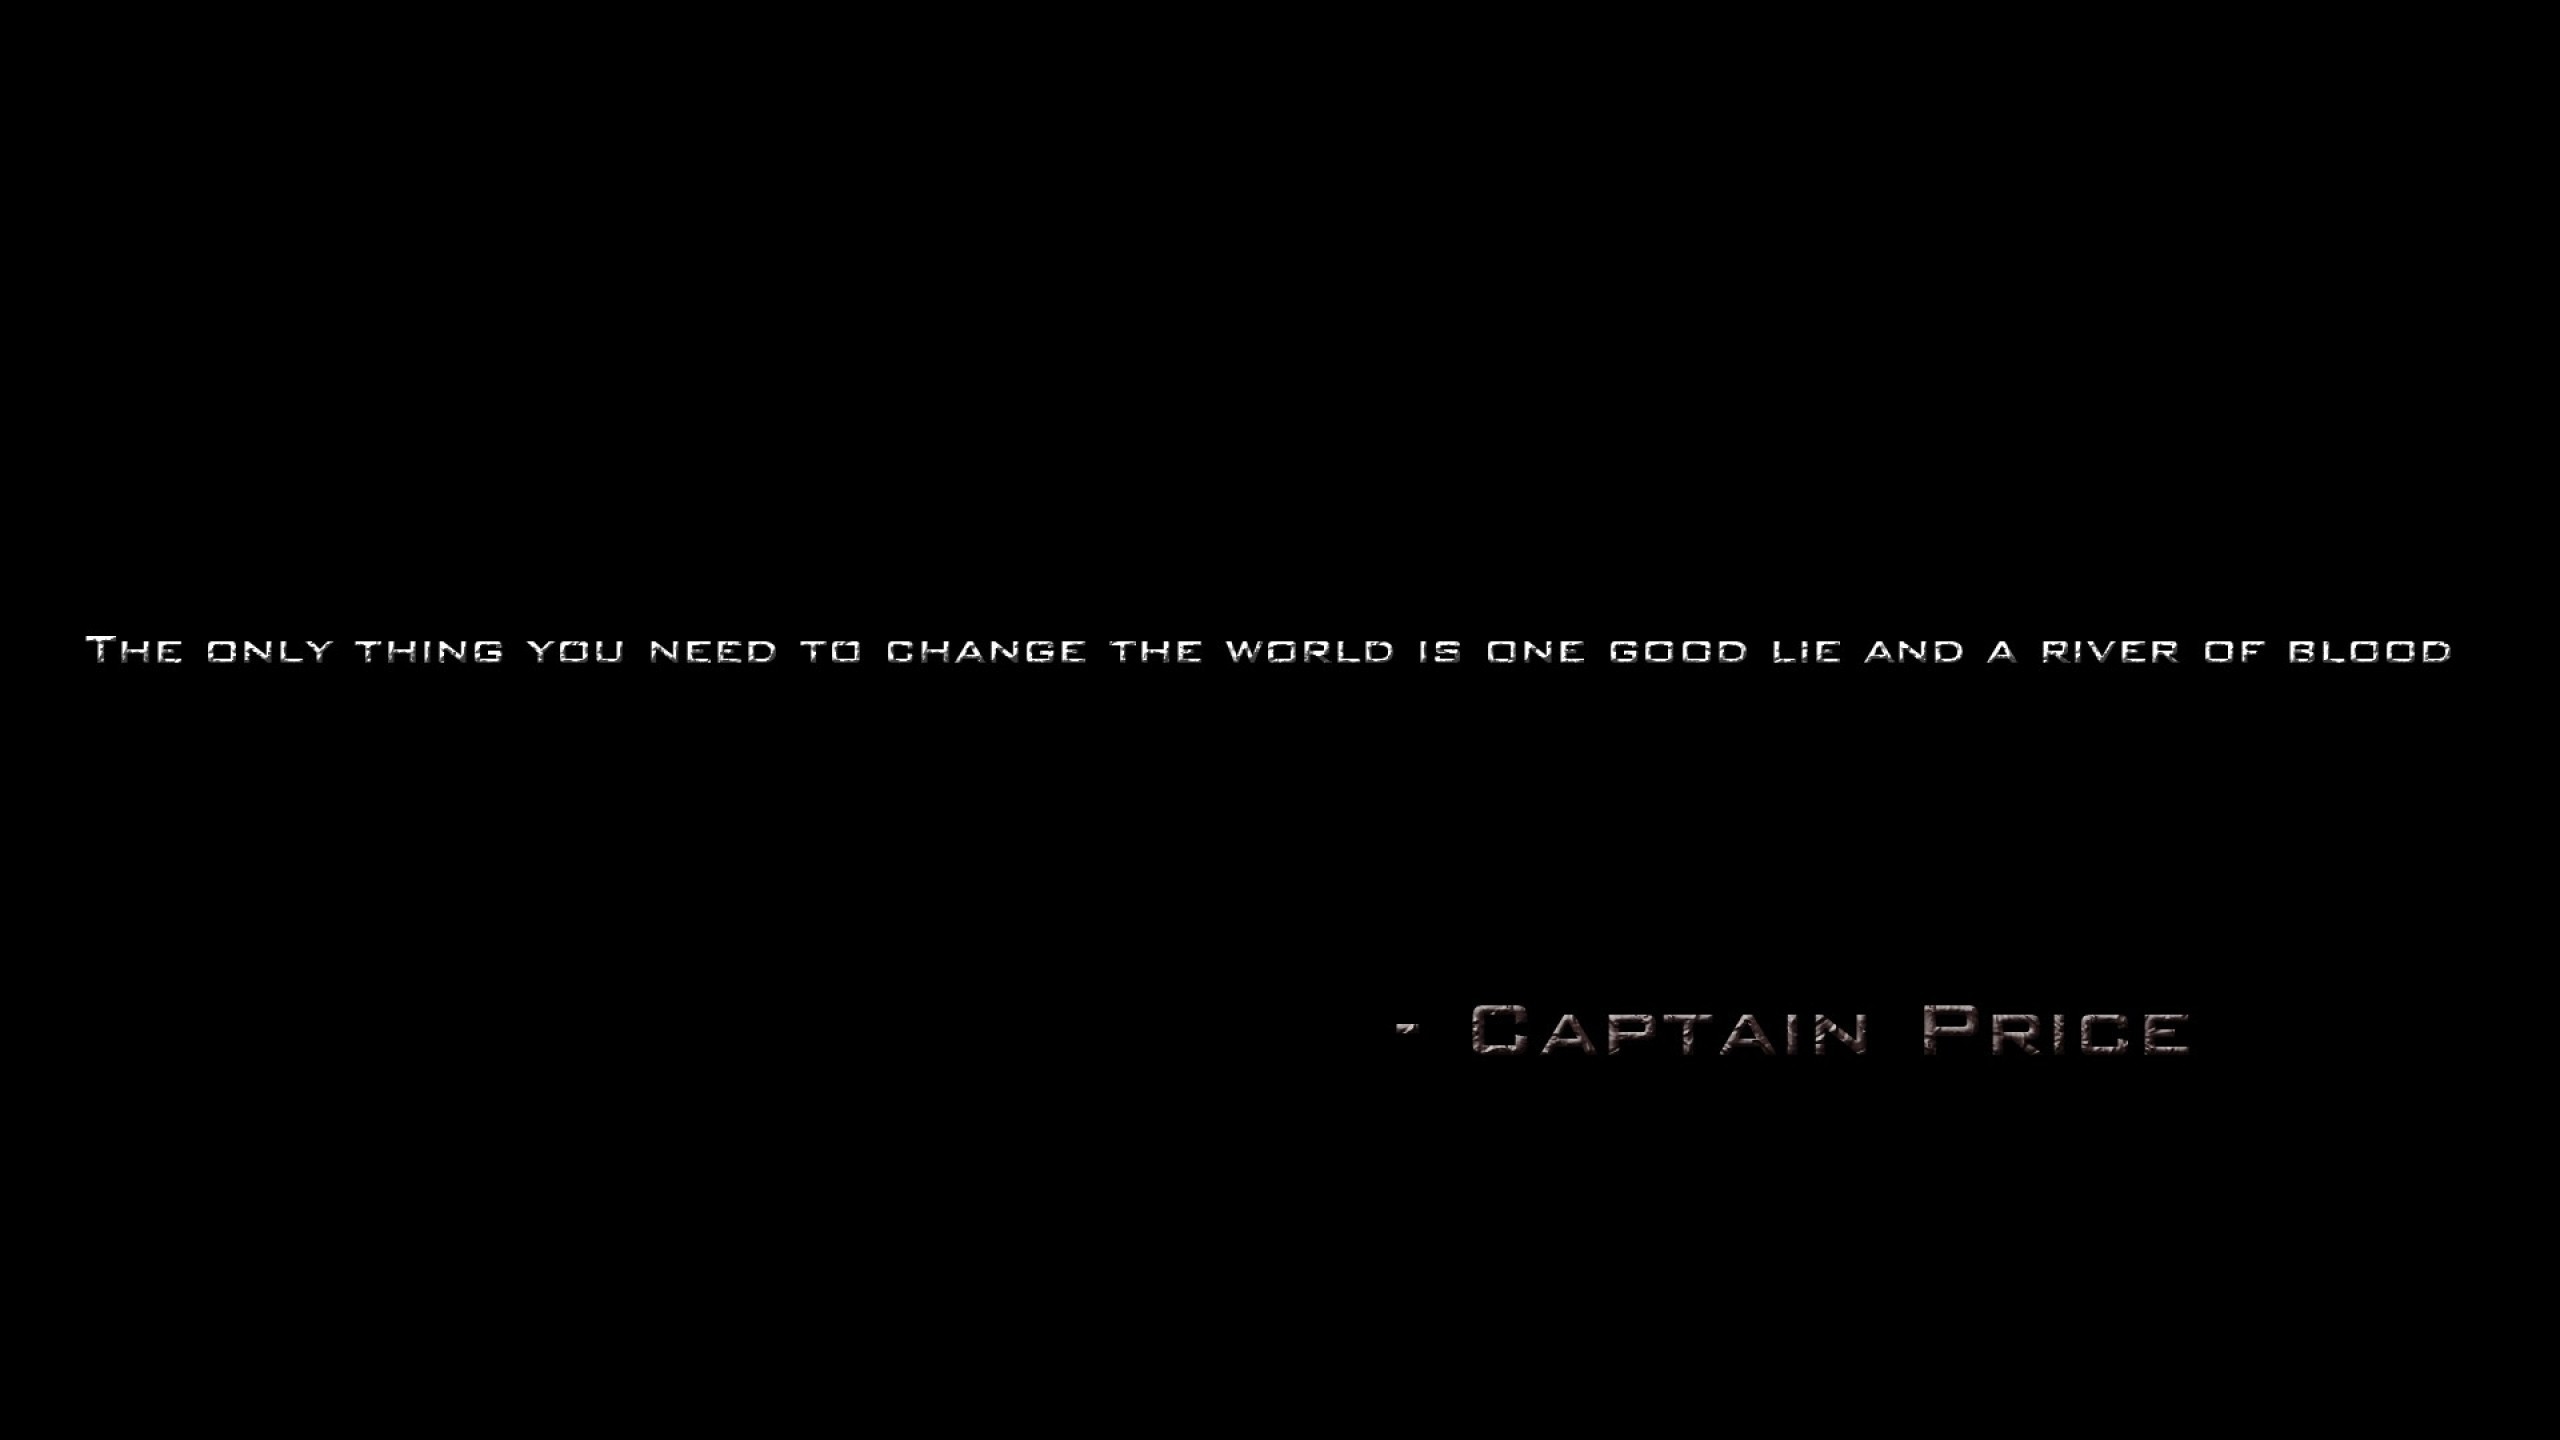 General 2560x1440 digital art quote Call of Duty PC gaming minimalism black background